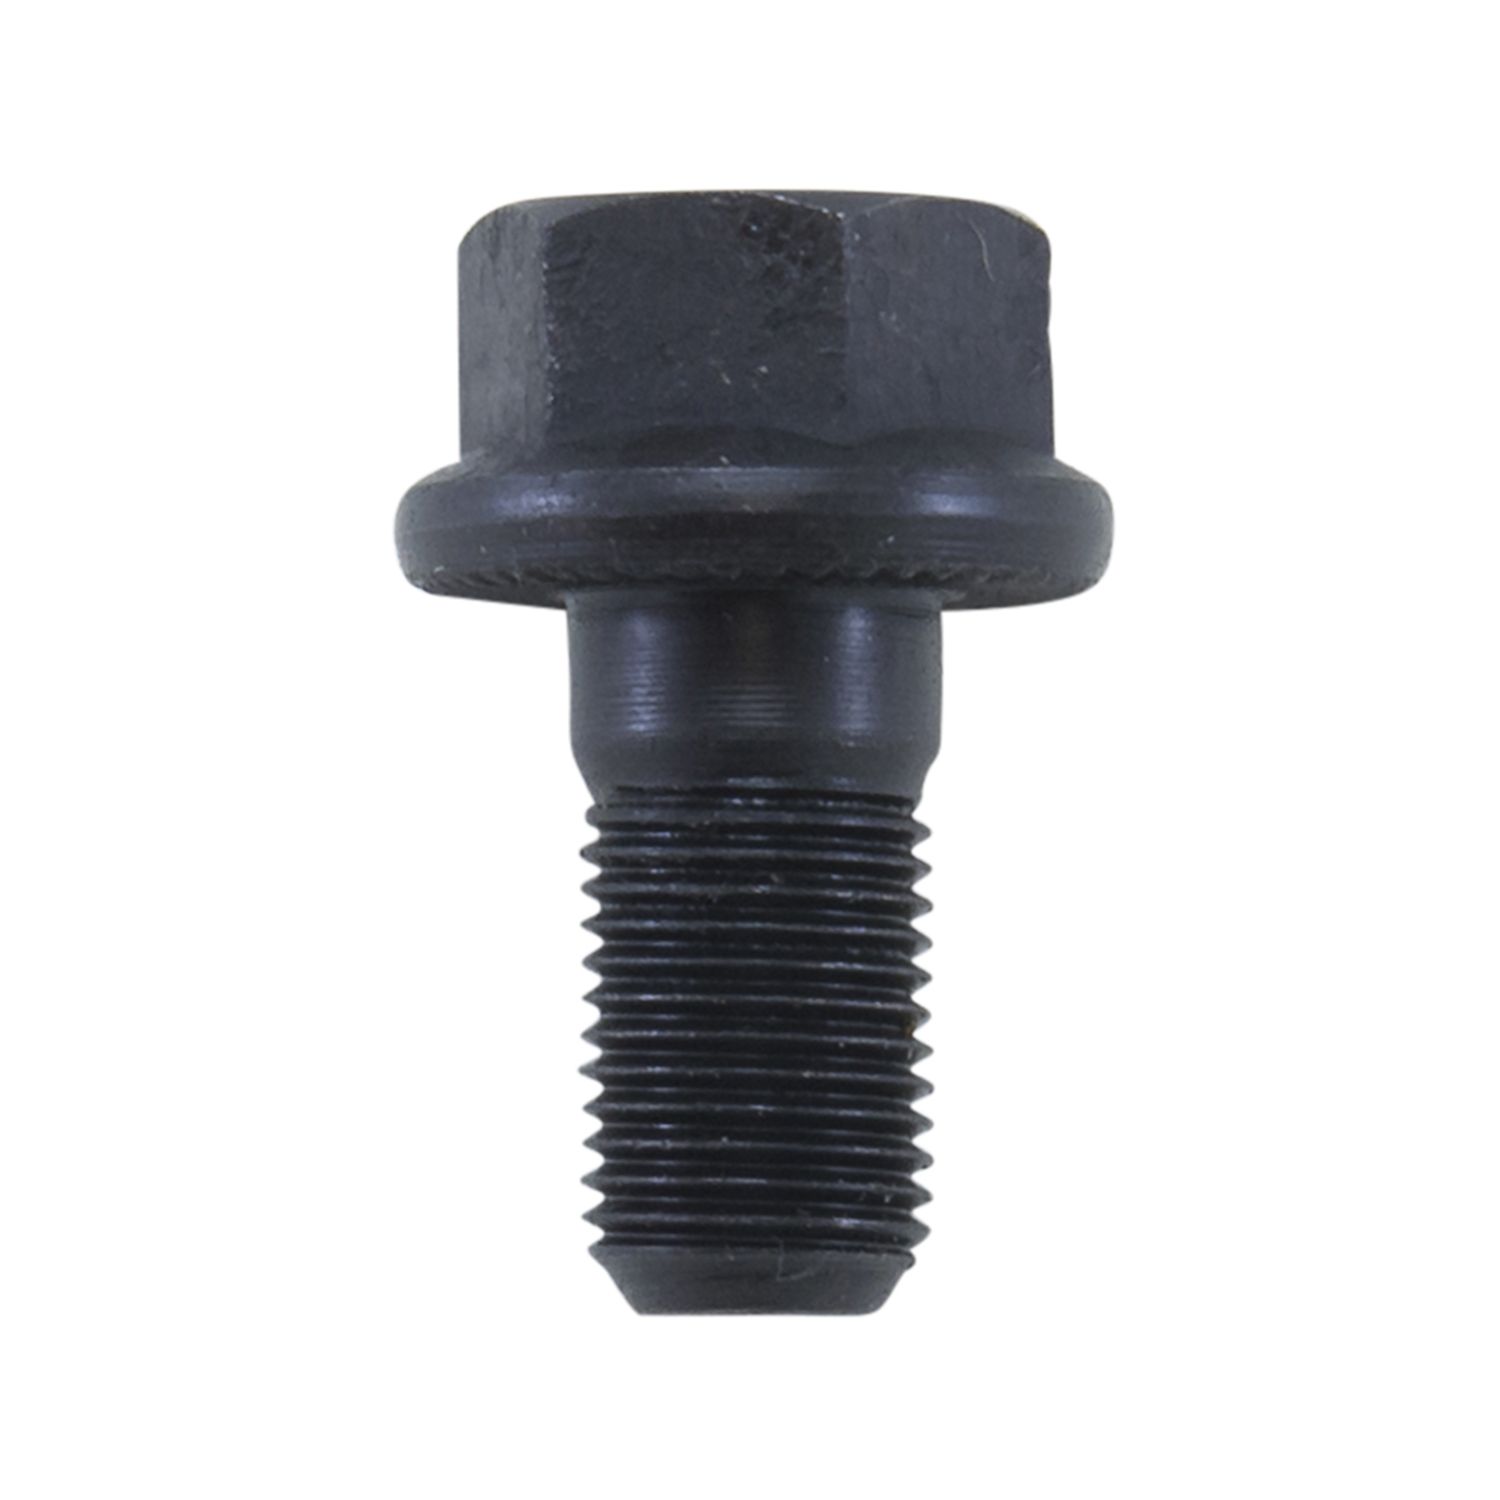 10.5" AAM & 11.5" AAM Dodge Ring Gear Bolt, Right H& Thread, M14 x 1.480" Long